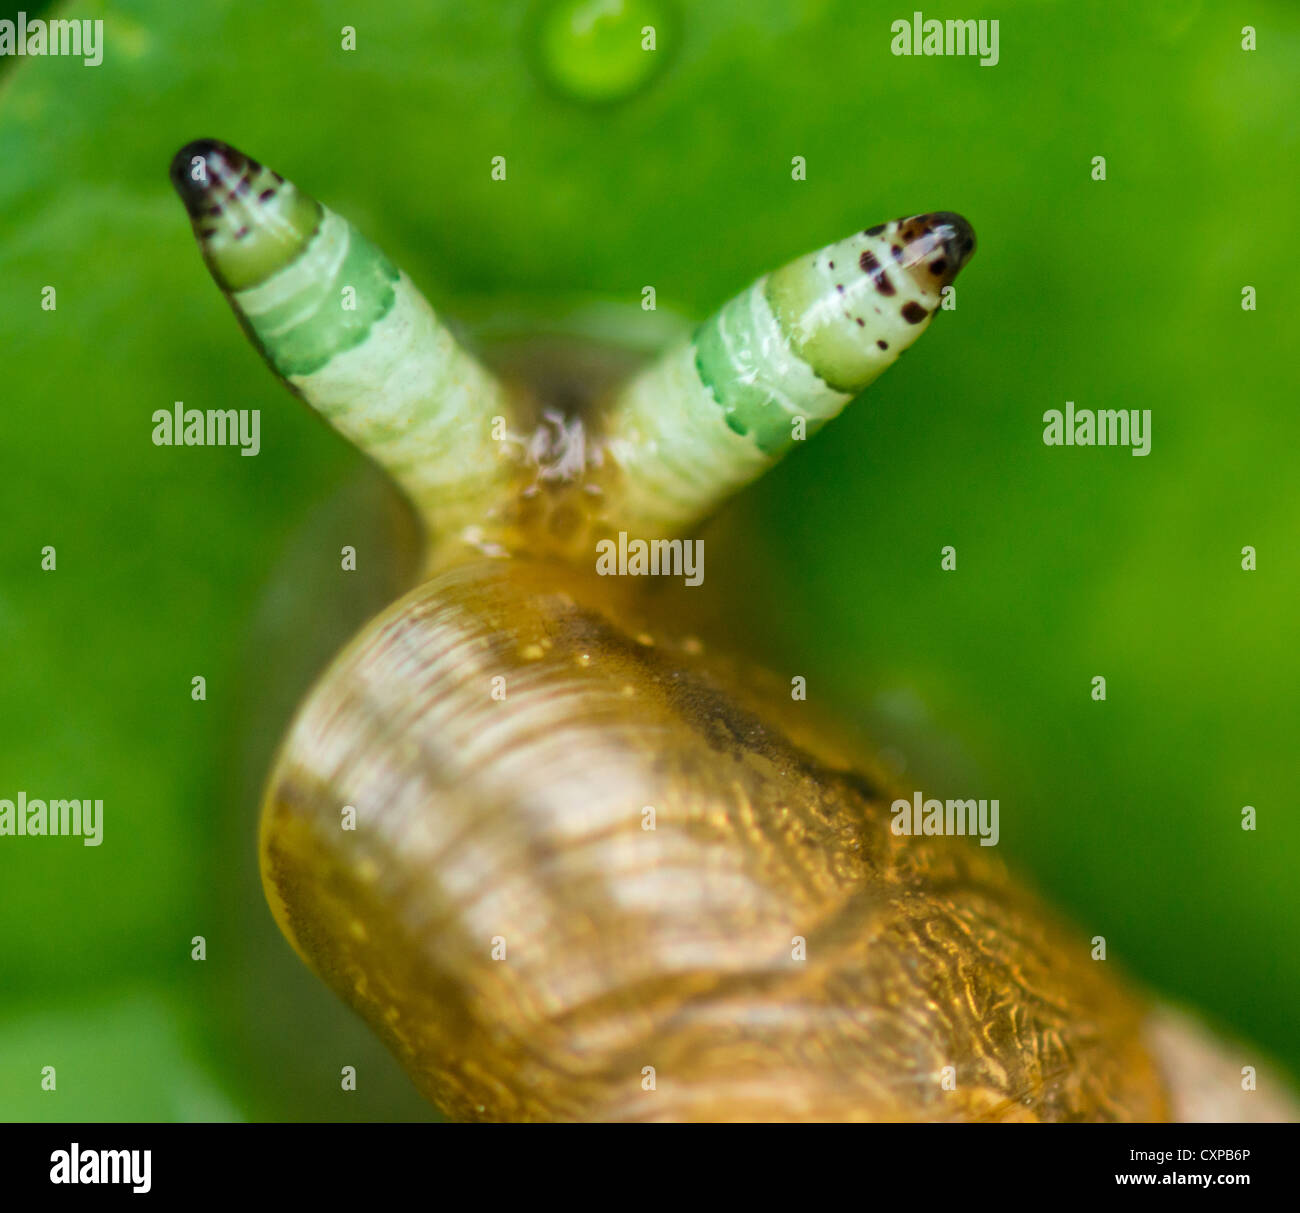 Snail infected with a parasite in its tentacles Stock Photo